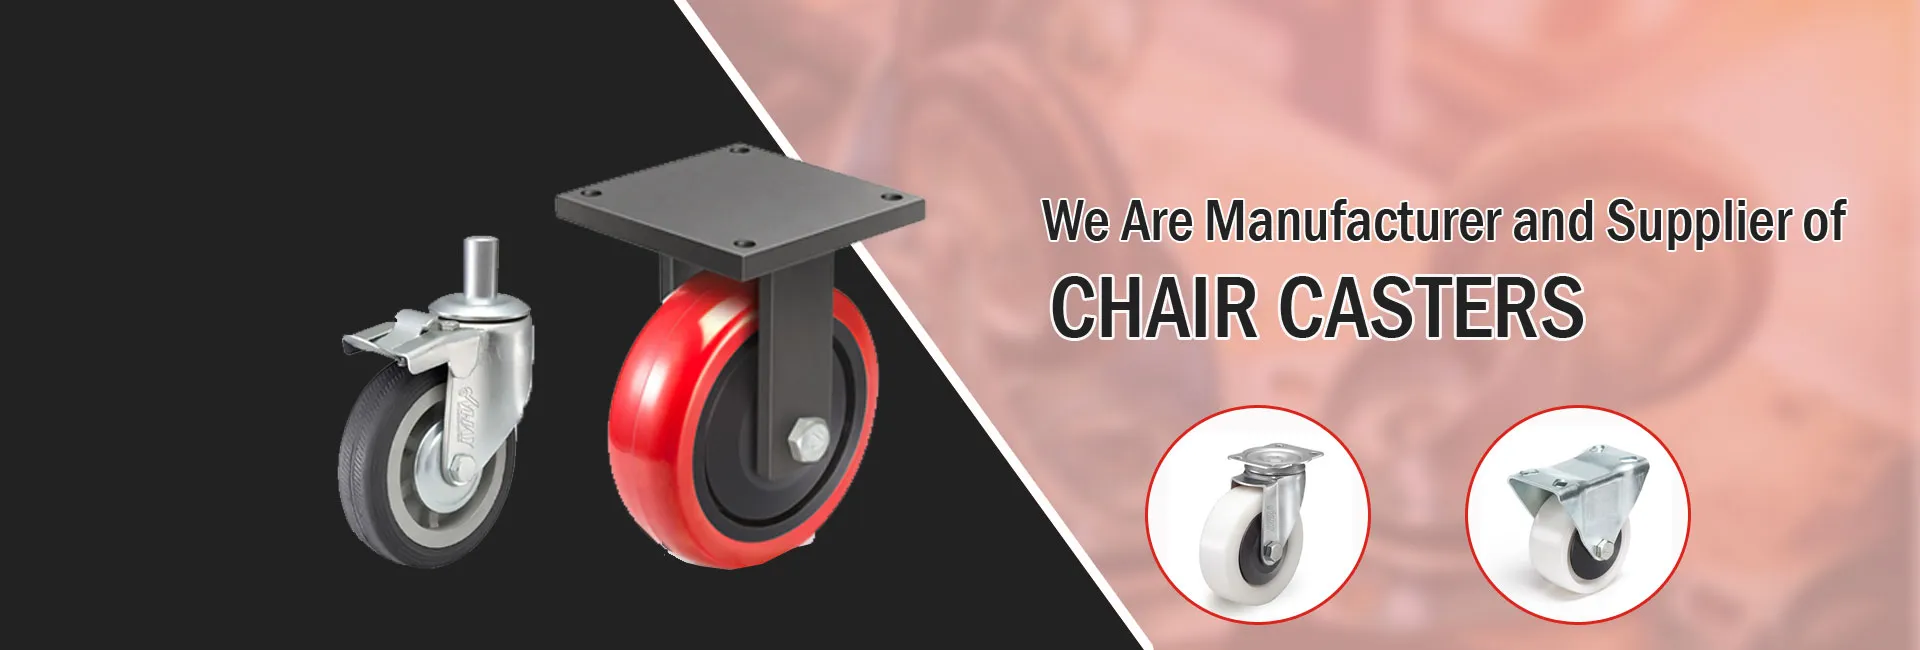 Chair casters manufacturer